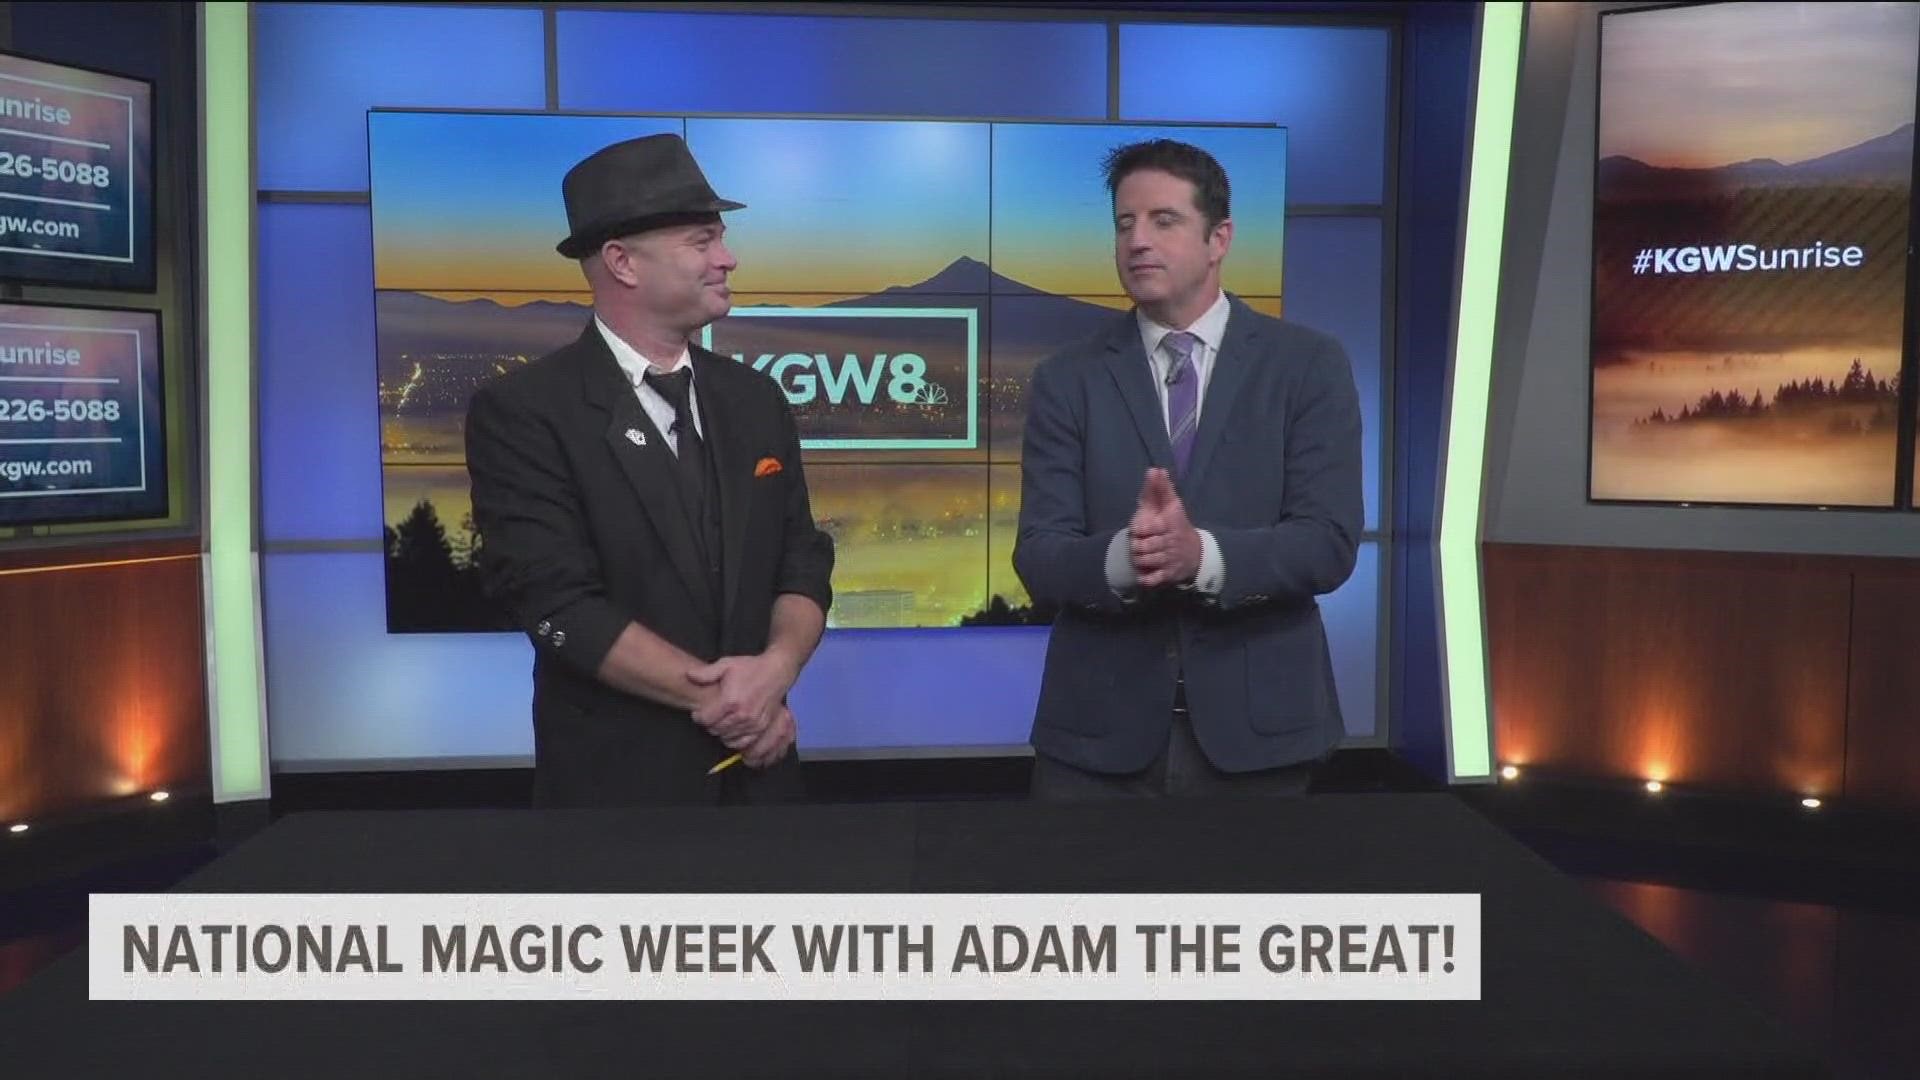 The week of Oct. 24 is National Magic Week. Portland area magician Adam the Great stopped by the KGW studio and left the Sunrise team speechless after card tricks.